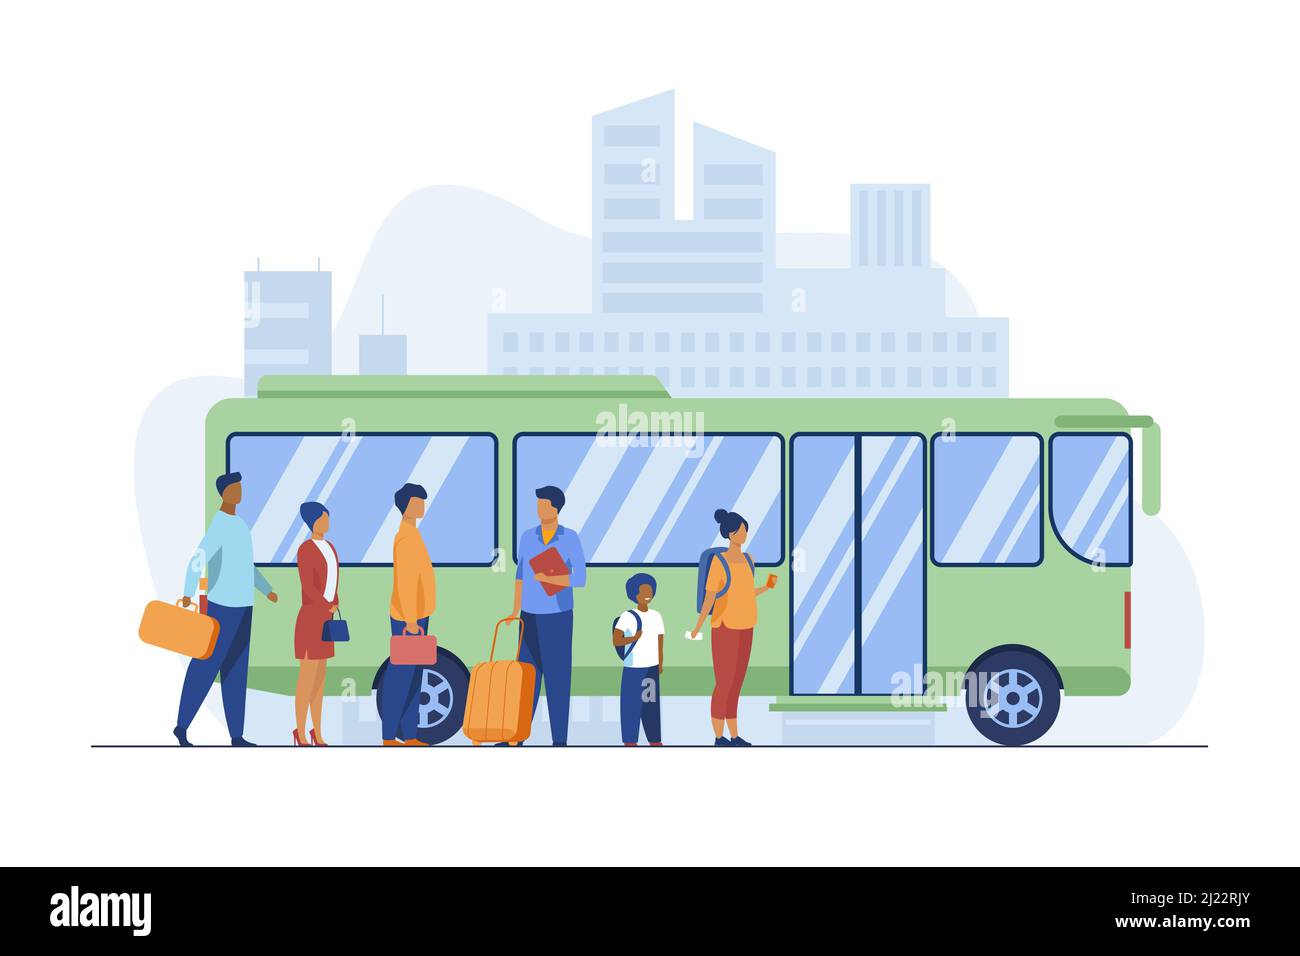 Passengers waiting for bus in city. Queue, town, road flat vector illustration. Public transport and urban lifestyle concept for banner, website desig Stock Vector